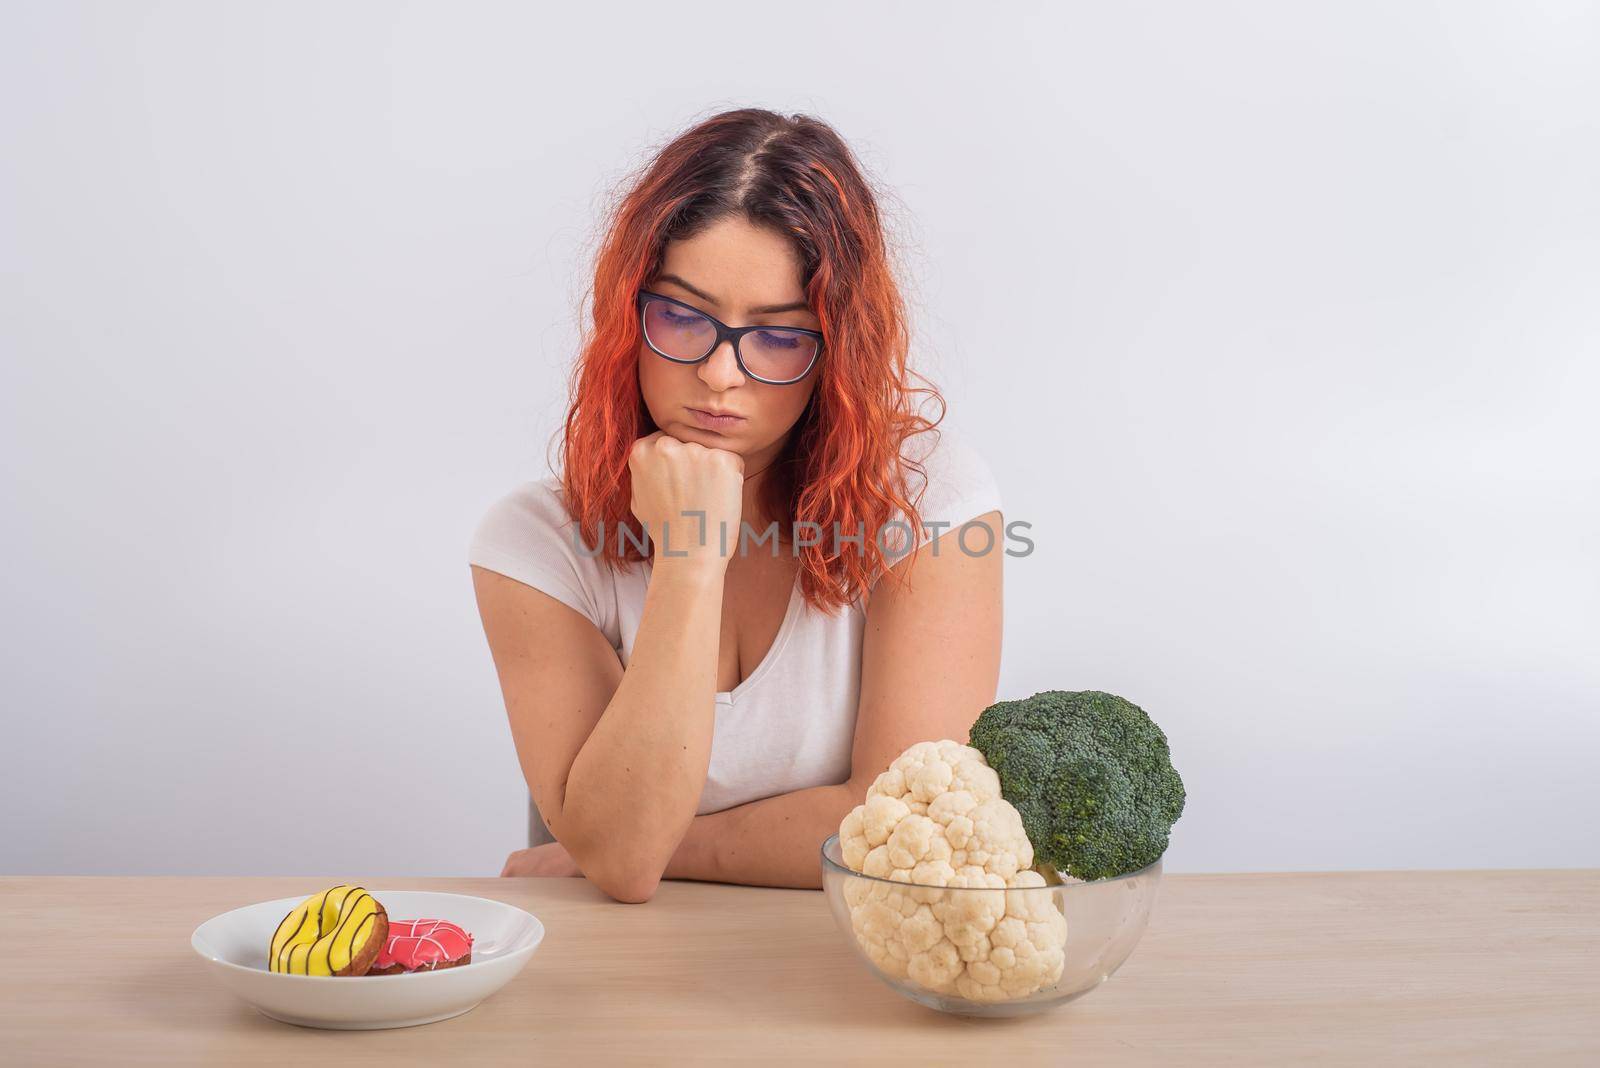 Caucasian woman on a diet dreaming of fast food. Redhead girl chooses between broccoli and donuts on white background